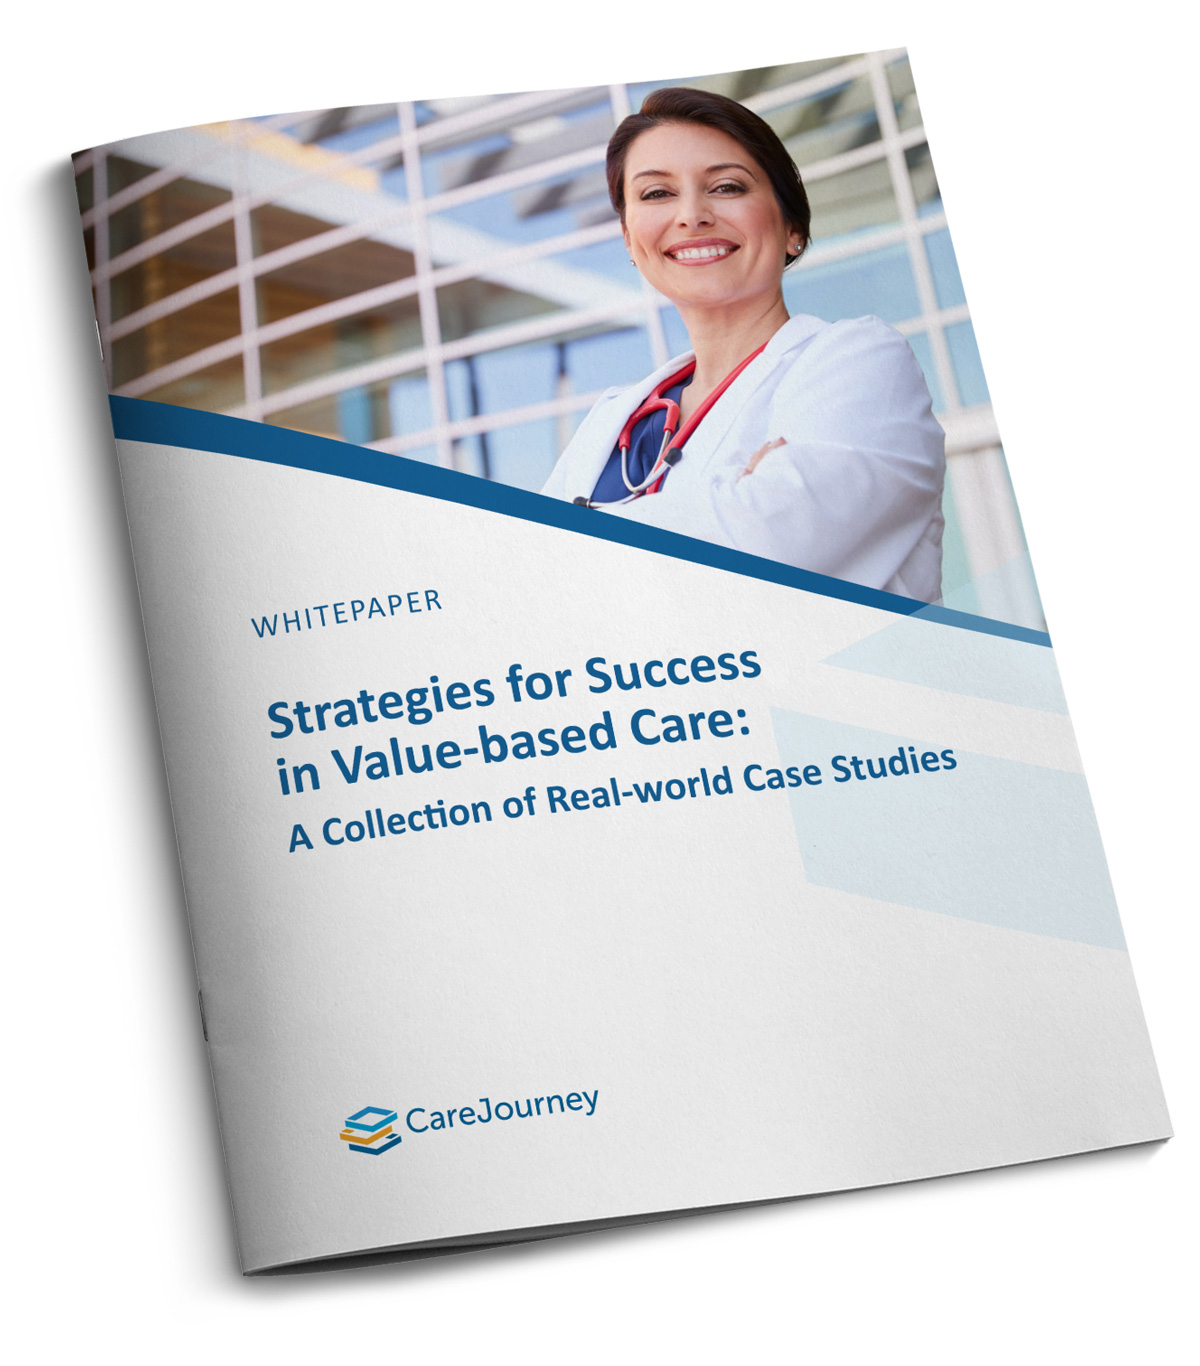 CareJourney Whitepaper Strategies for Success in Value-based Care: A Collection of Real-world Case Studie